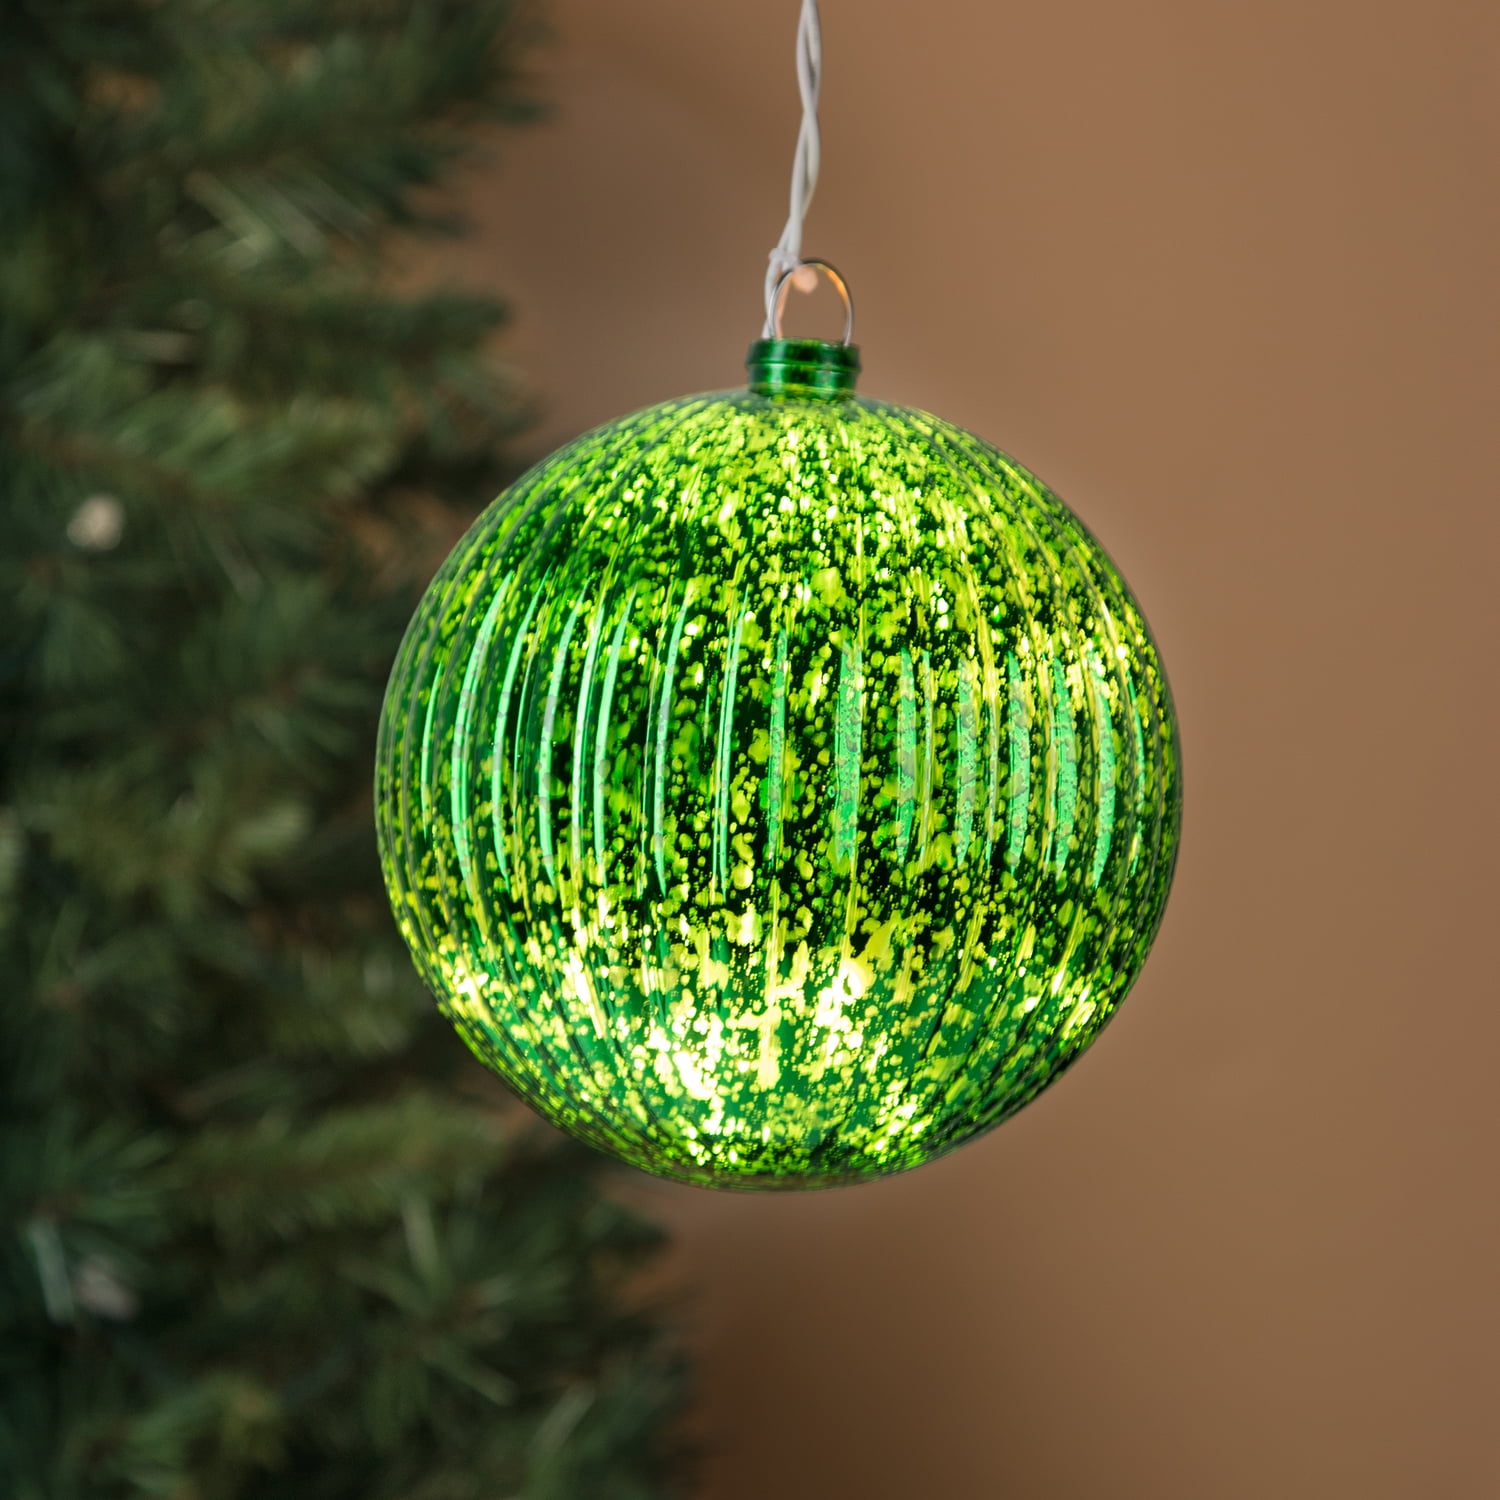 Creatice Outdoor Christmas Ornament Balls with Simple Decor